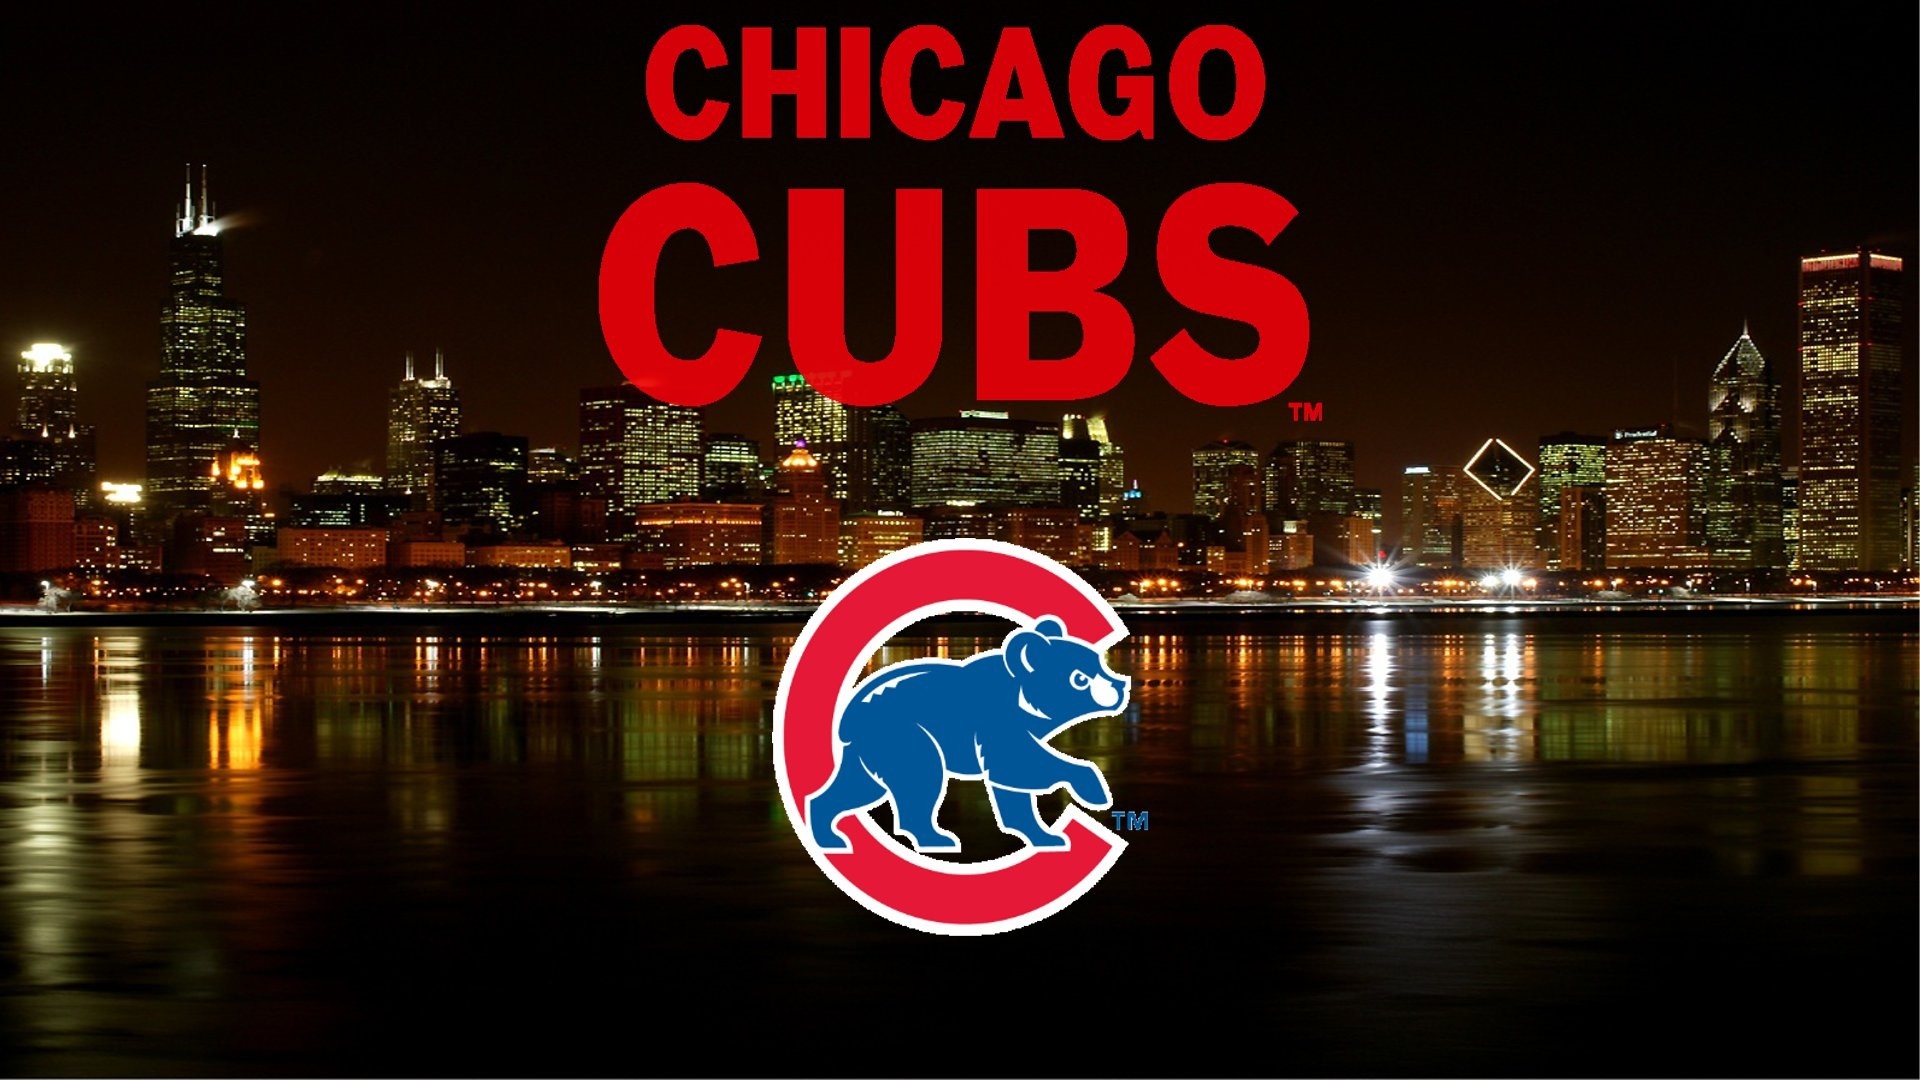 … chicago cubs wallpaper for android wallpapersafari …